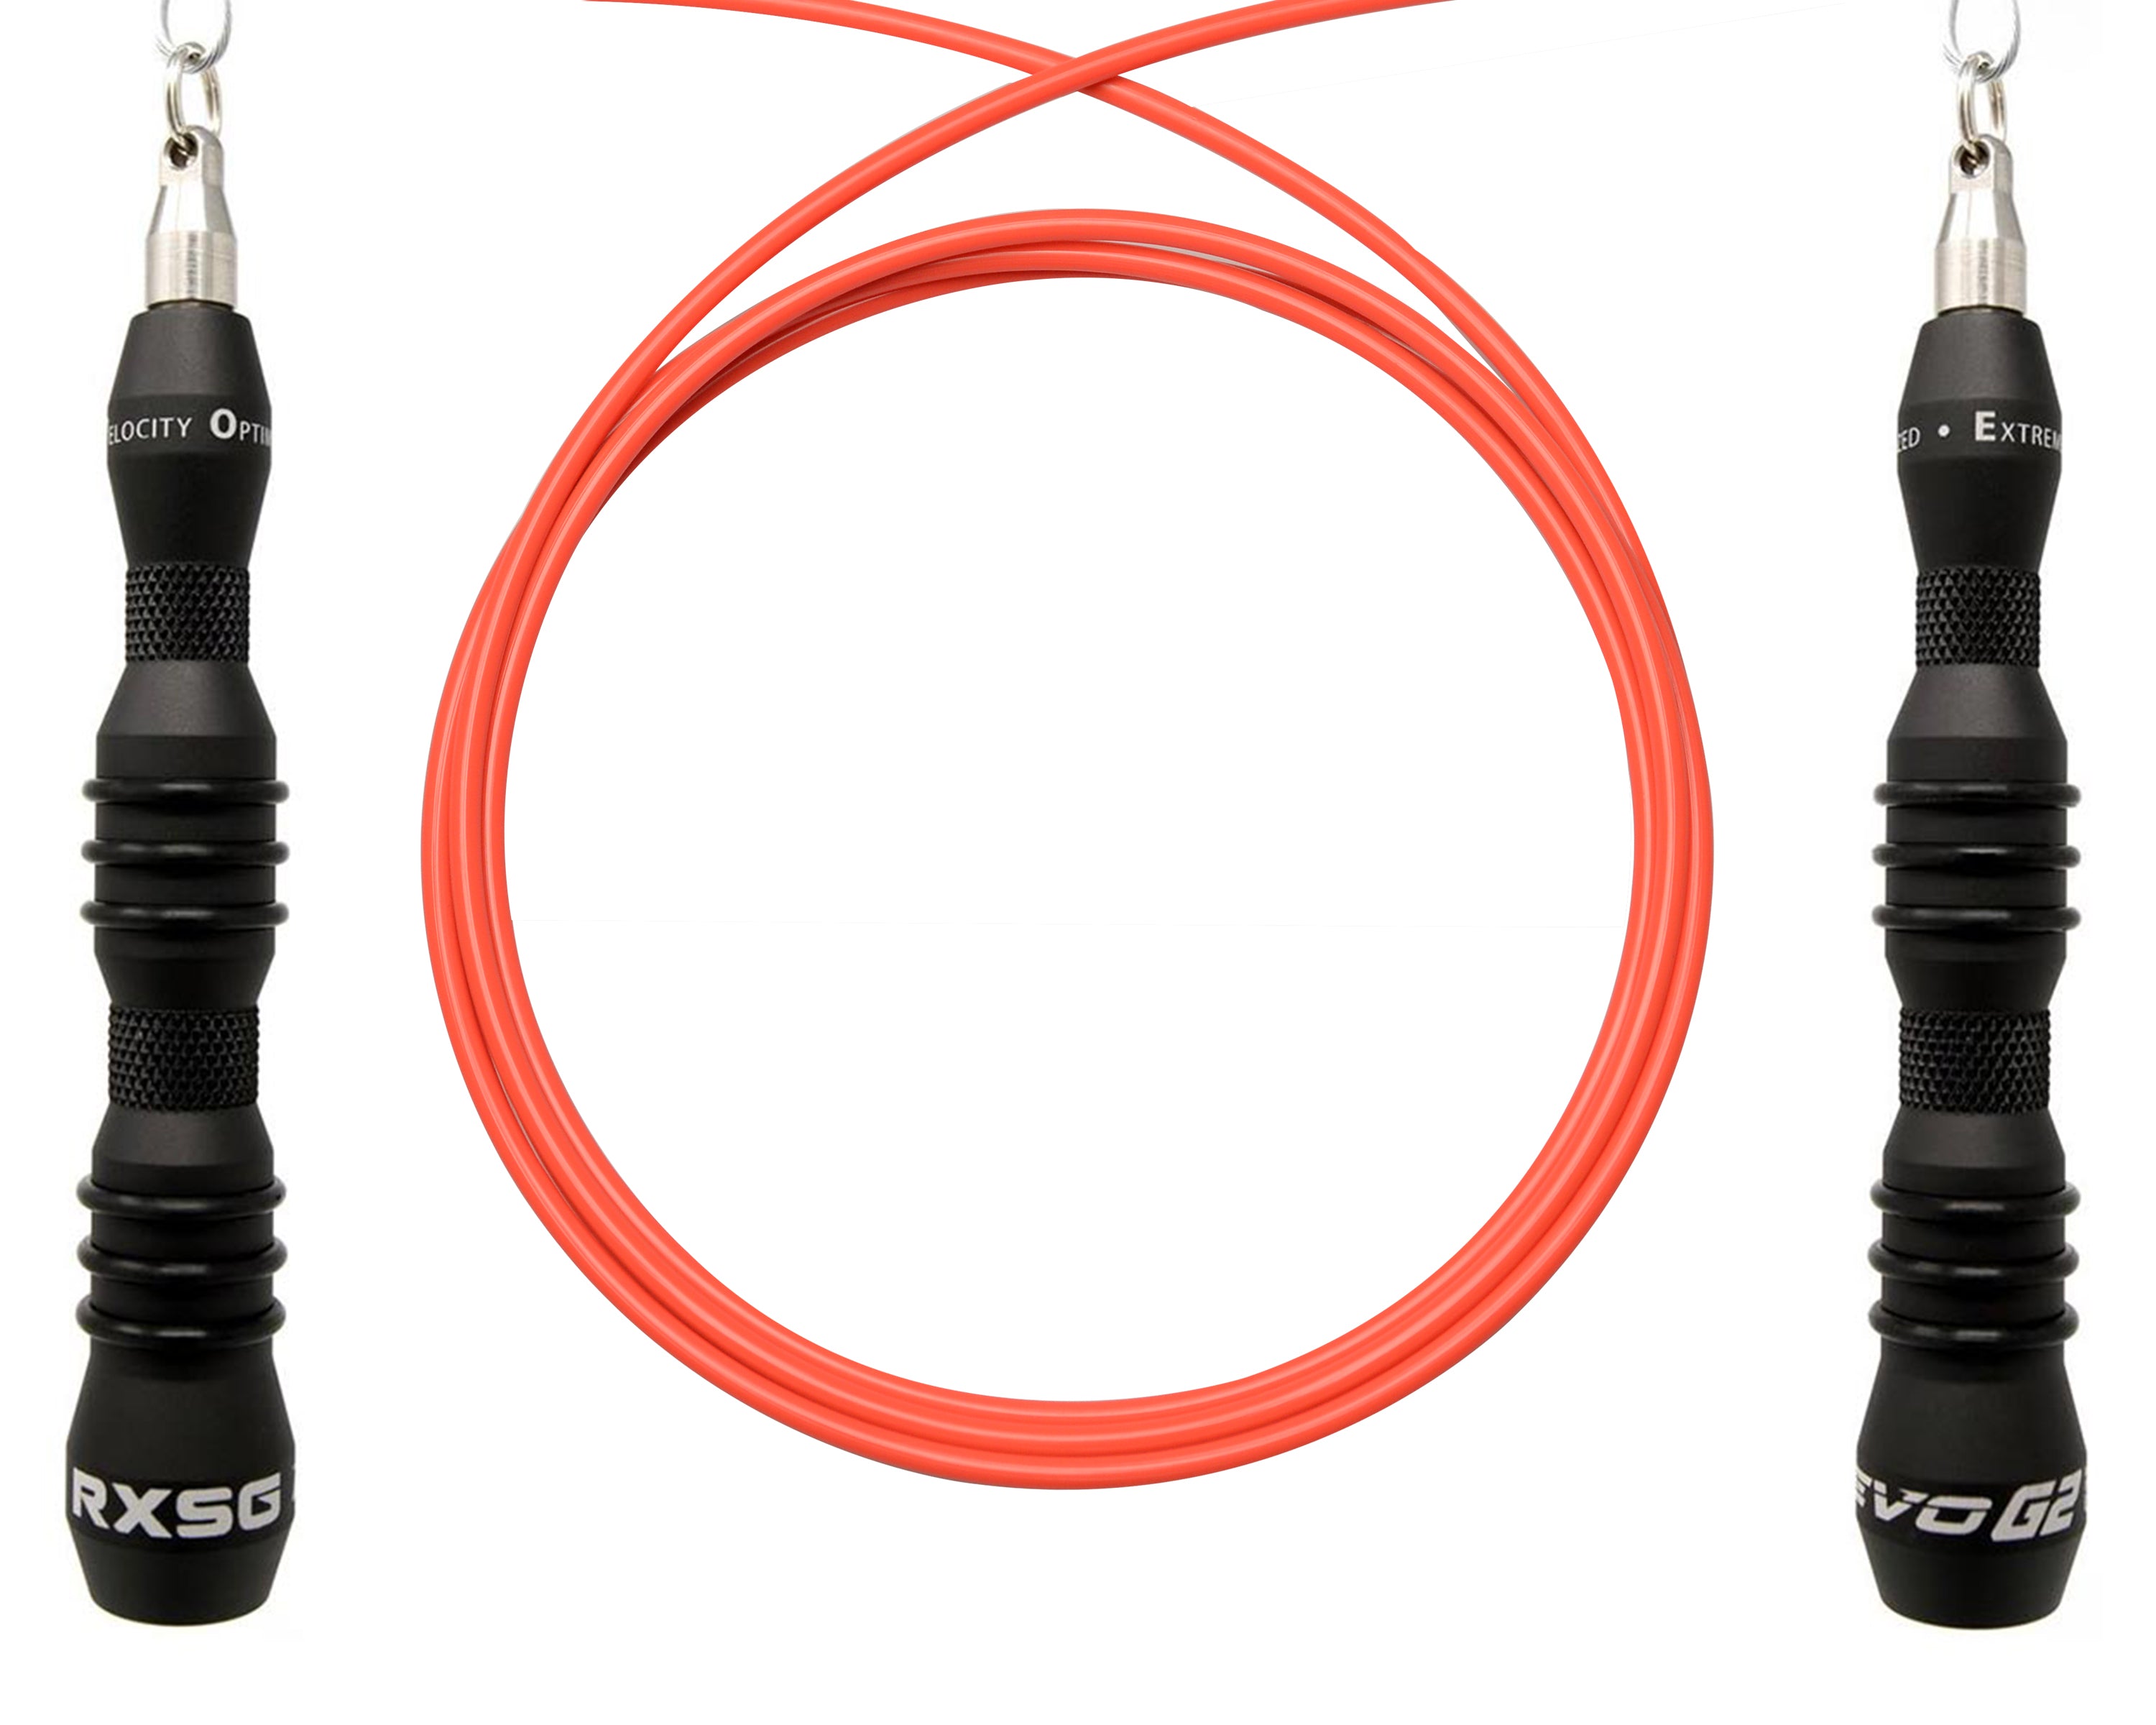 EVO G2 Speed Rope with Orange Cable